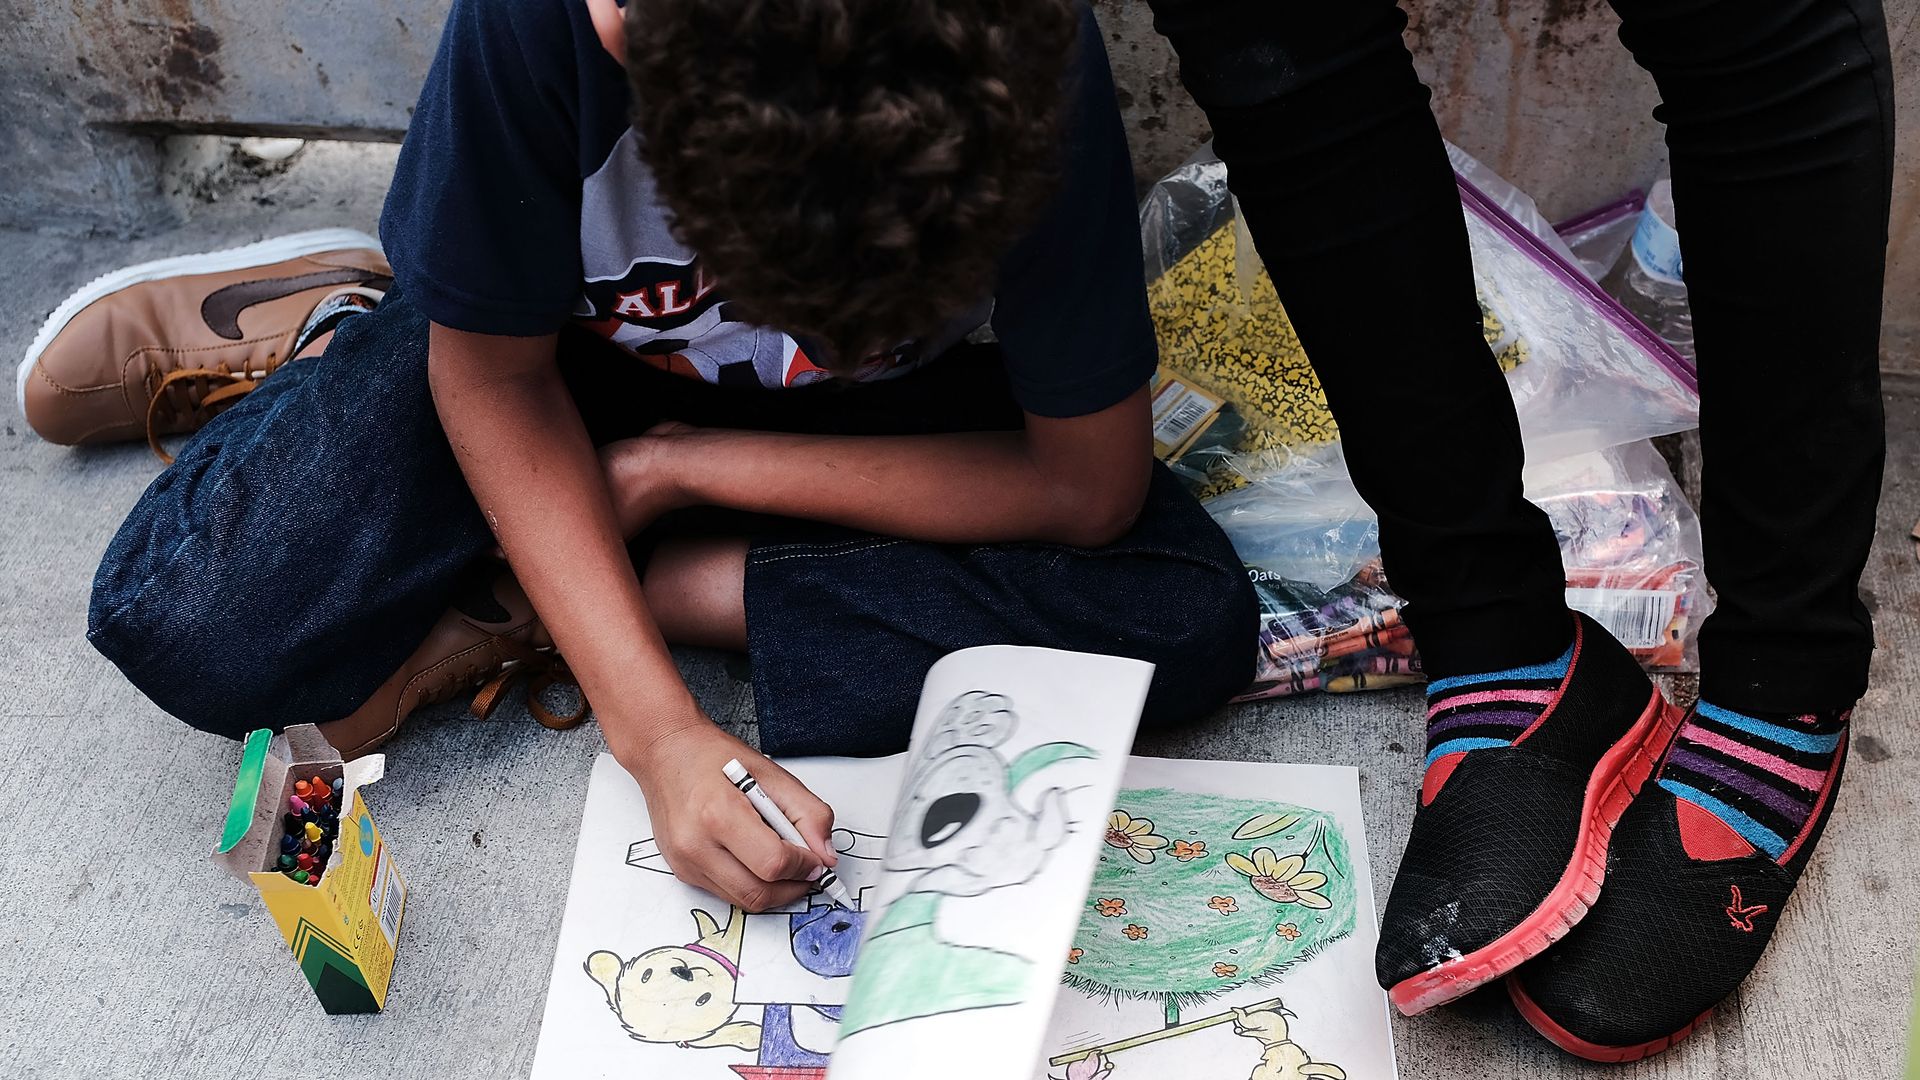 A Honduran child draws while waiting with his family after being denied entry into the Texas city of Brownsville which has become dependent on the daily crossing into and out of Mexico.